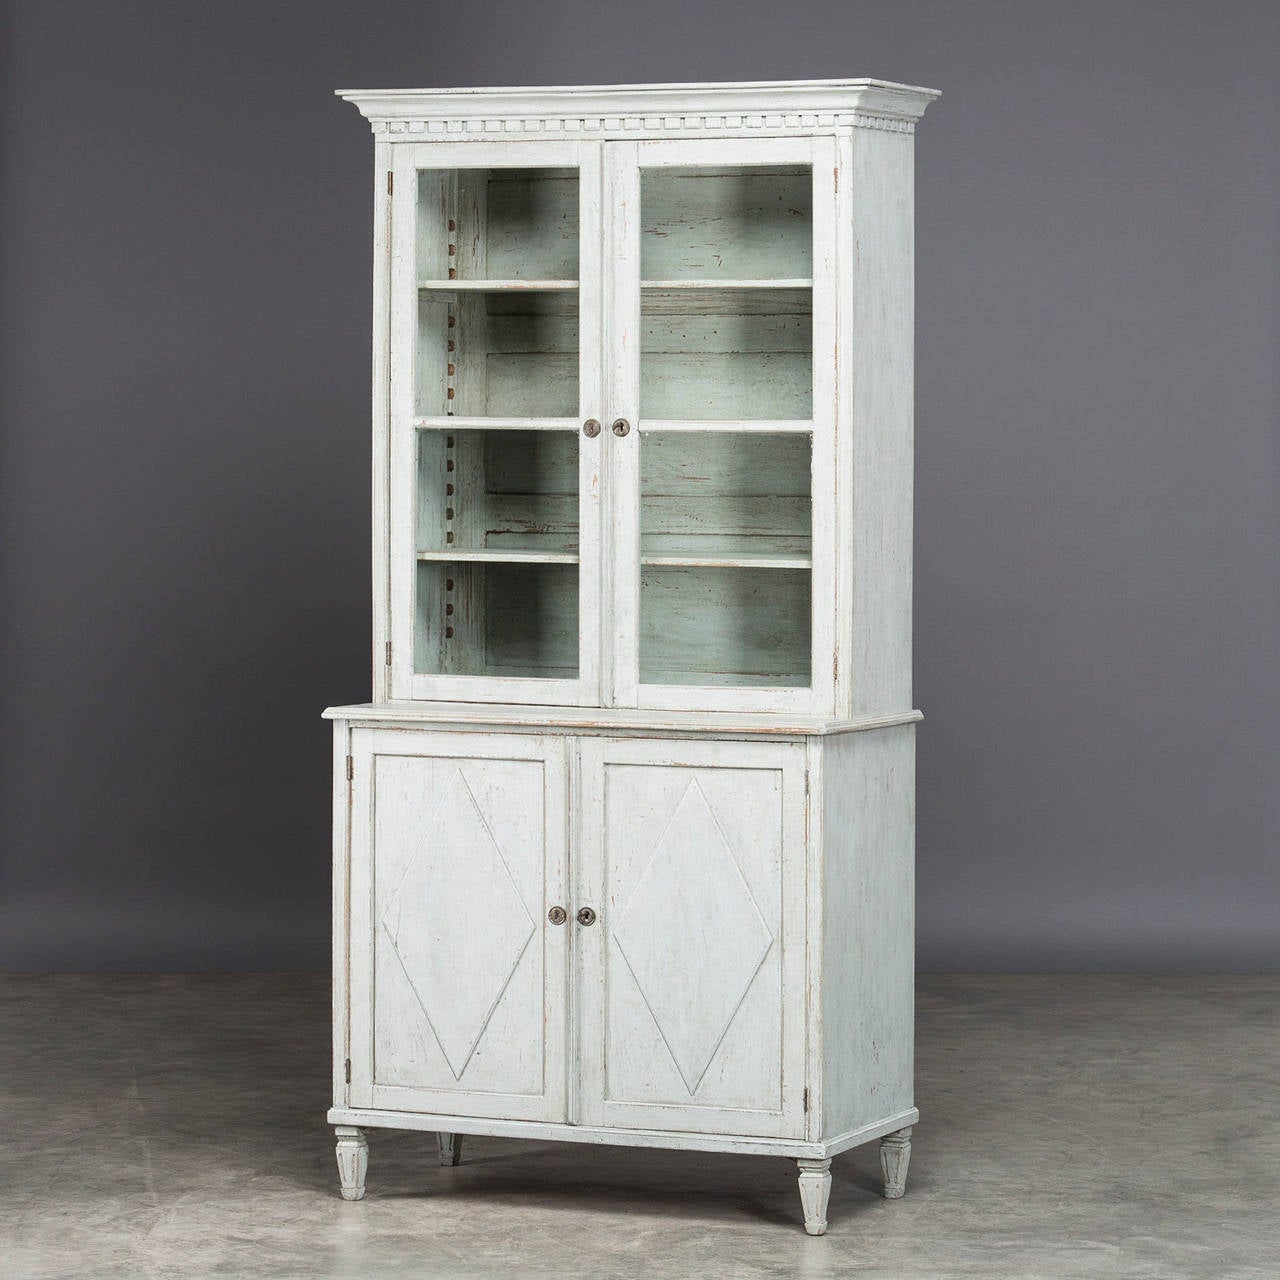 Showcase in Gustavian style. Upper part with a pair of doors with glass, base with a pair of doors with panels in the form of diamonds. Sweden 1840-1860 - Good patina. The cabinet is in 2 parts.